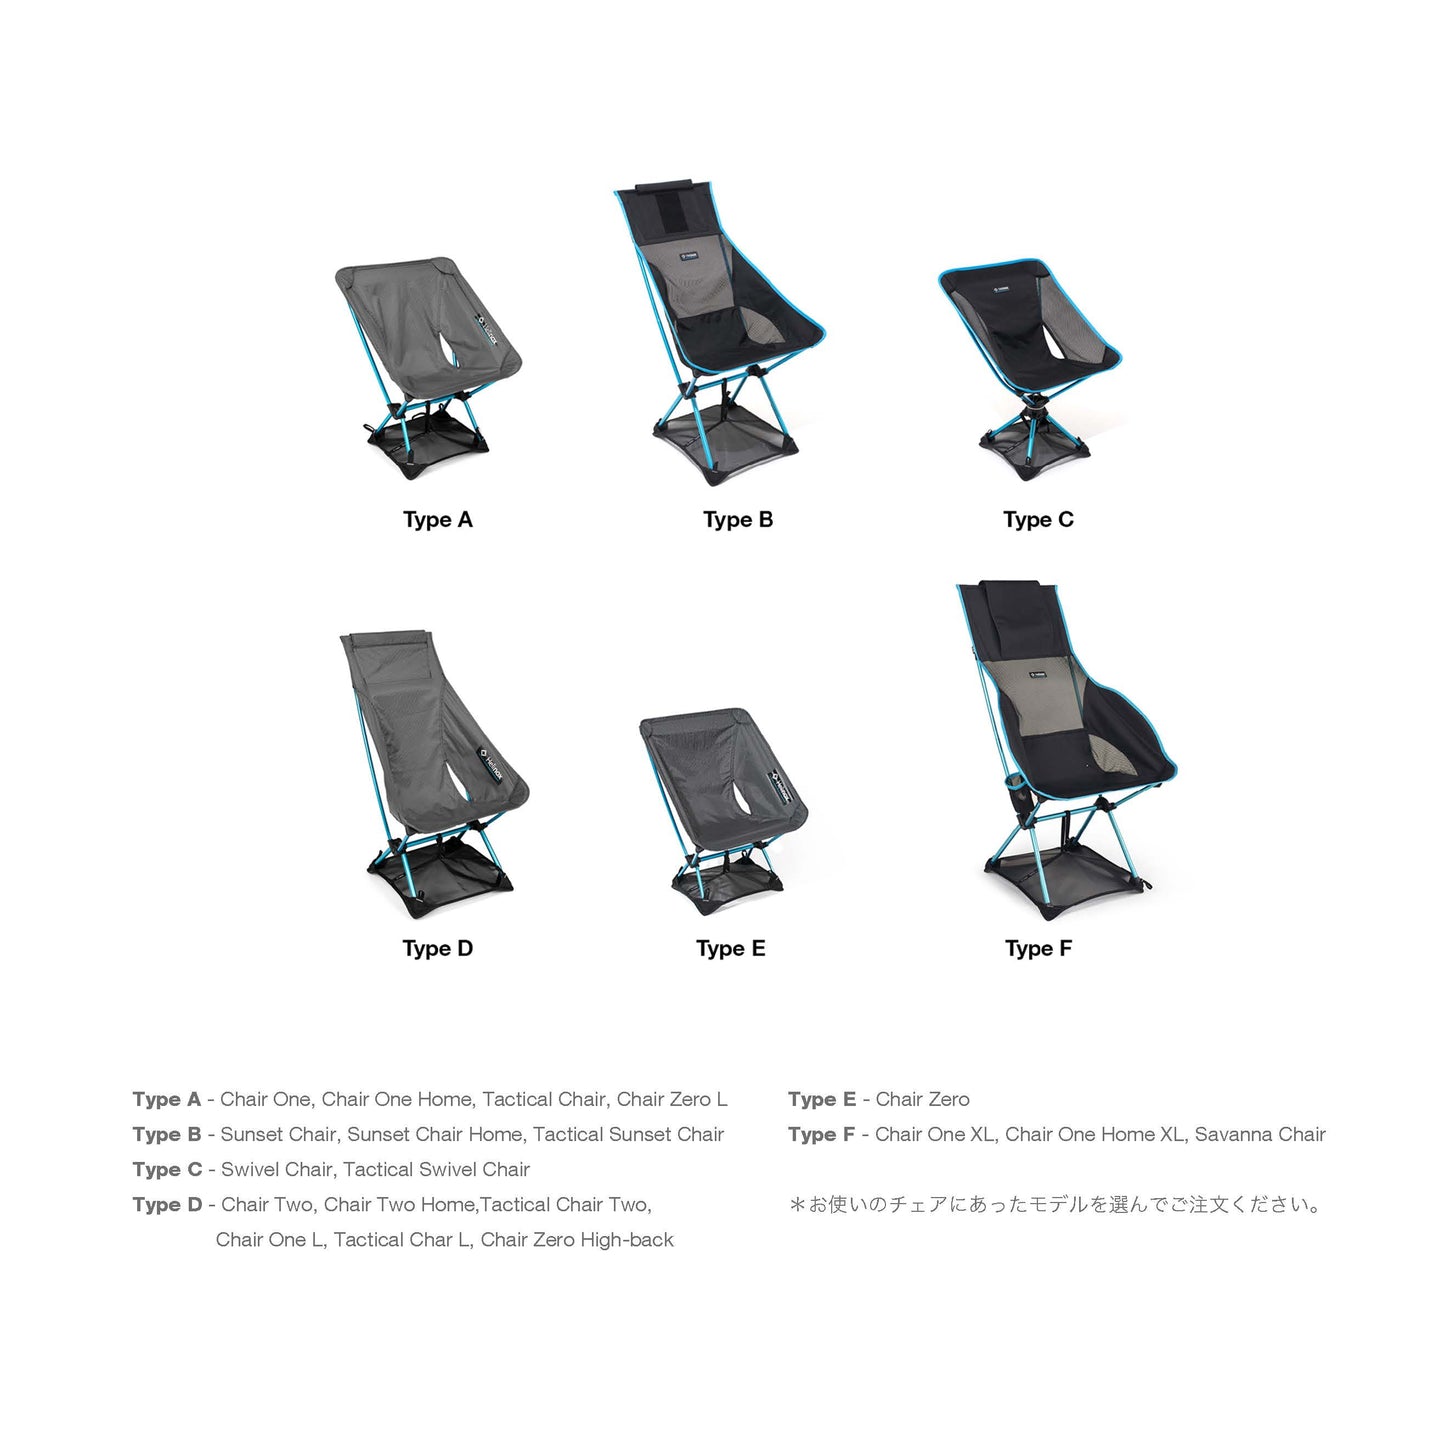 Ground Sheet for chair two (& Chair Zero Highback) - Black